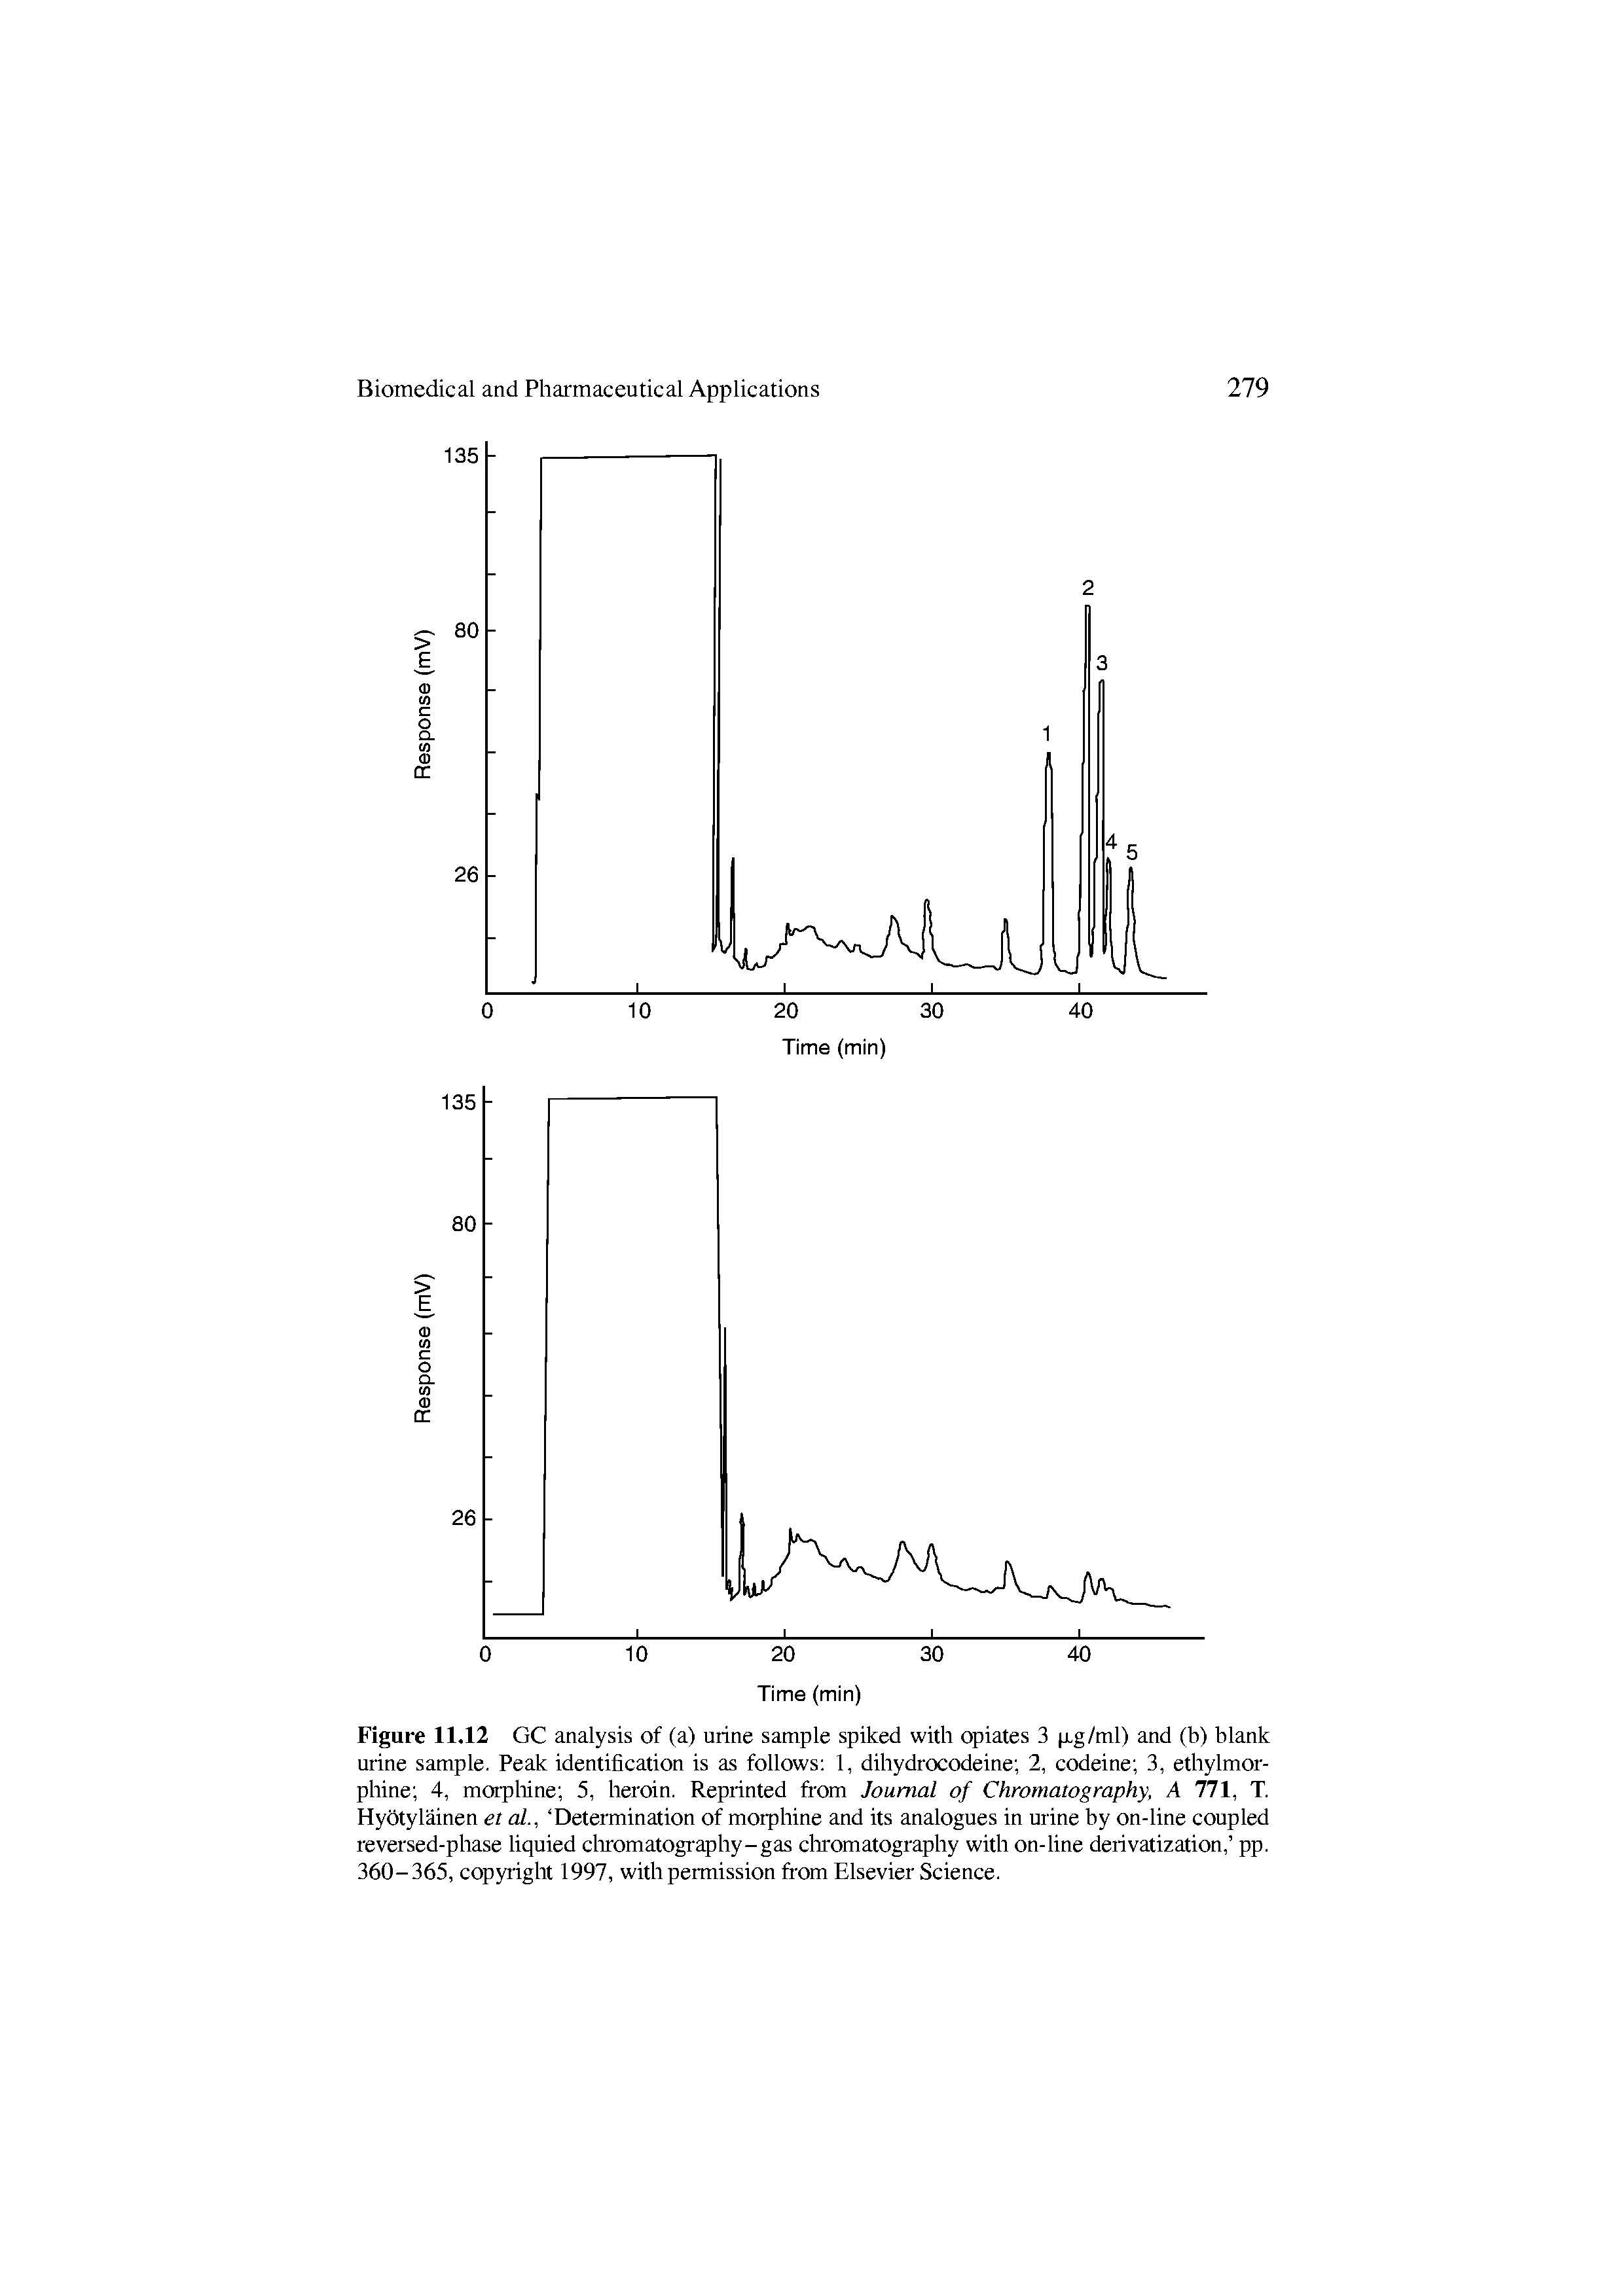 Figure 11.12 GC analysis of (a) urine sample spiked with opiates 3 p.g/ml) and (b) blank urine sample. Peak identification is as follows 1, dihydrocodeine 2, codeine 3, ethylmor-phine 4, moipliine 5, heroin. Reprinted from Journal of Chromatography, A 771, T. Hyotylainen et al., Determination of morphine and its analogues in urine by on-line coupled reversed-phase liquied cliromatography-gas clrromatography with on-line derivatization, pp. 360-365, copyright 1997, with permission from Elsevier Science.